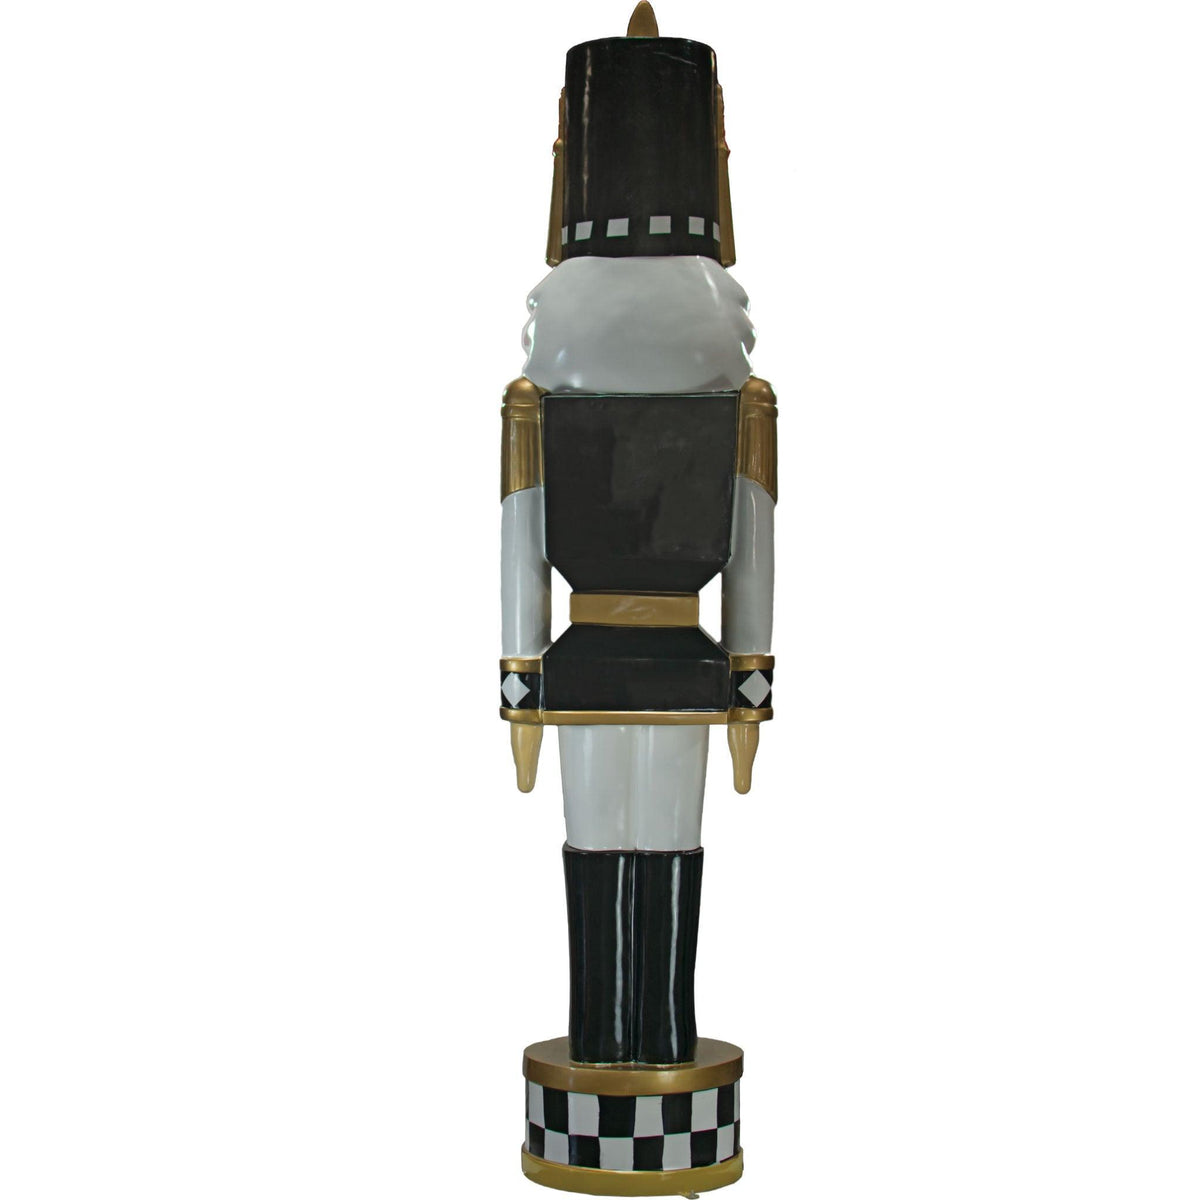 Lee Display's brand new Black and White 12FT Fiberglass Nutcrackers for sale for purchase and rental from leedisplay.com.  Shop now